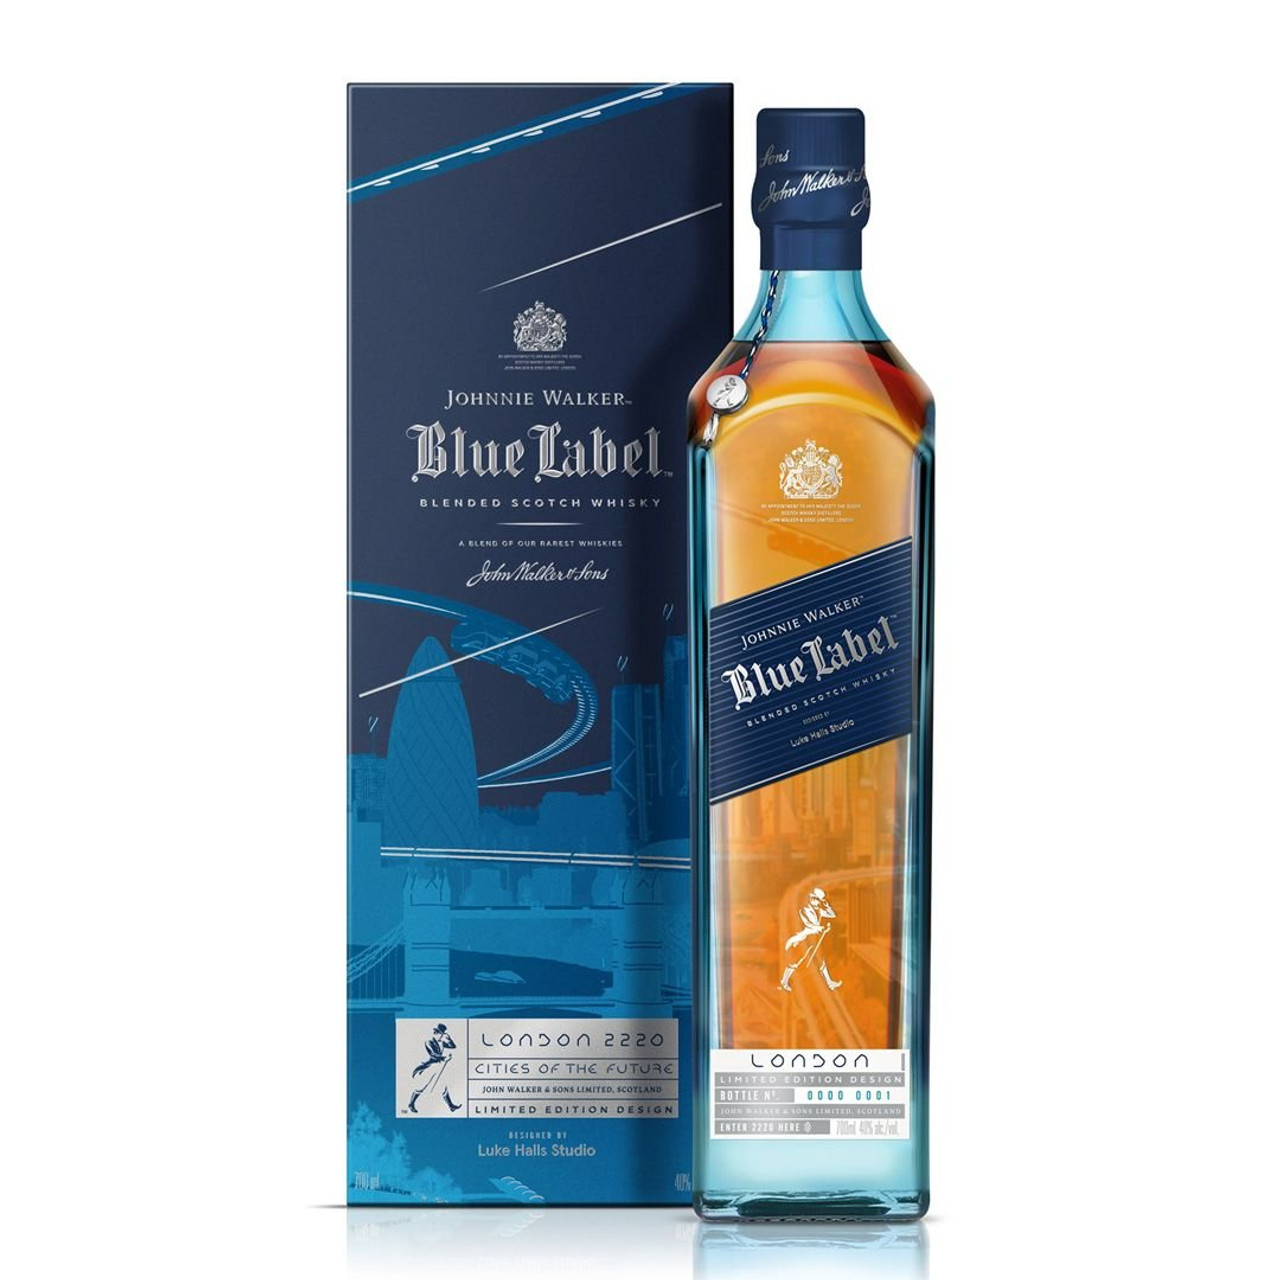 Johnnie_Walker_Blue_Cities_of_Futures_London_box__72414